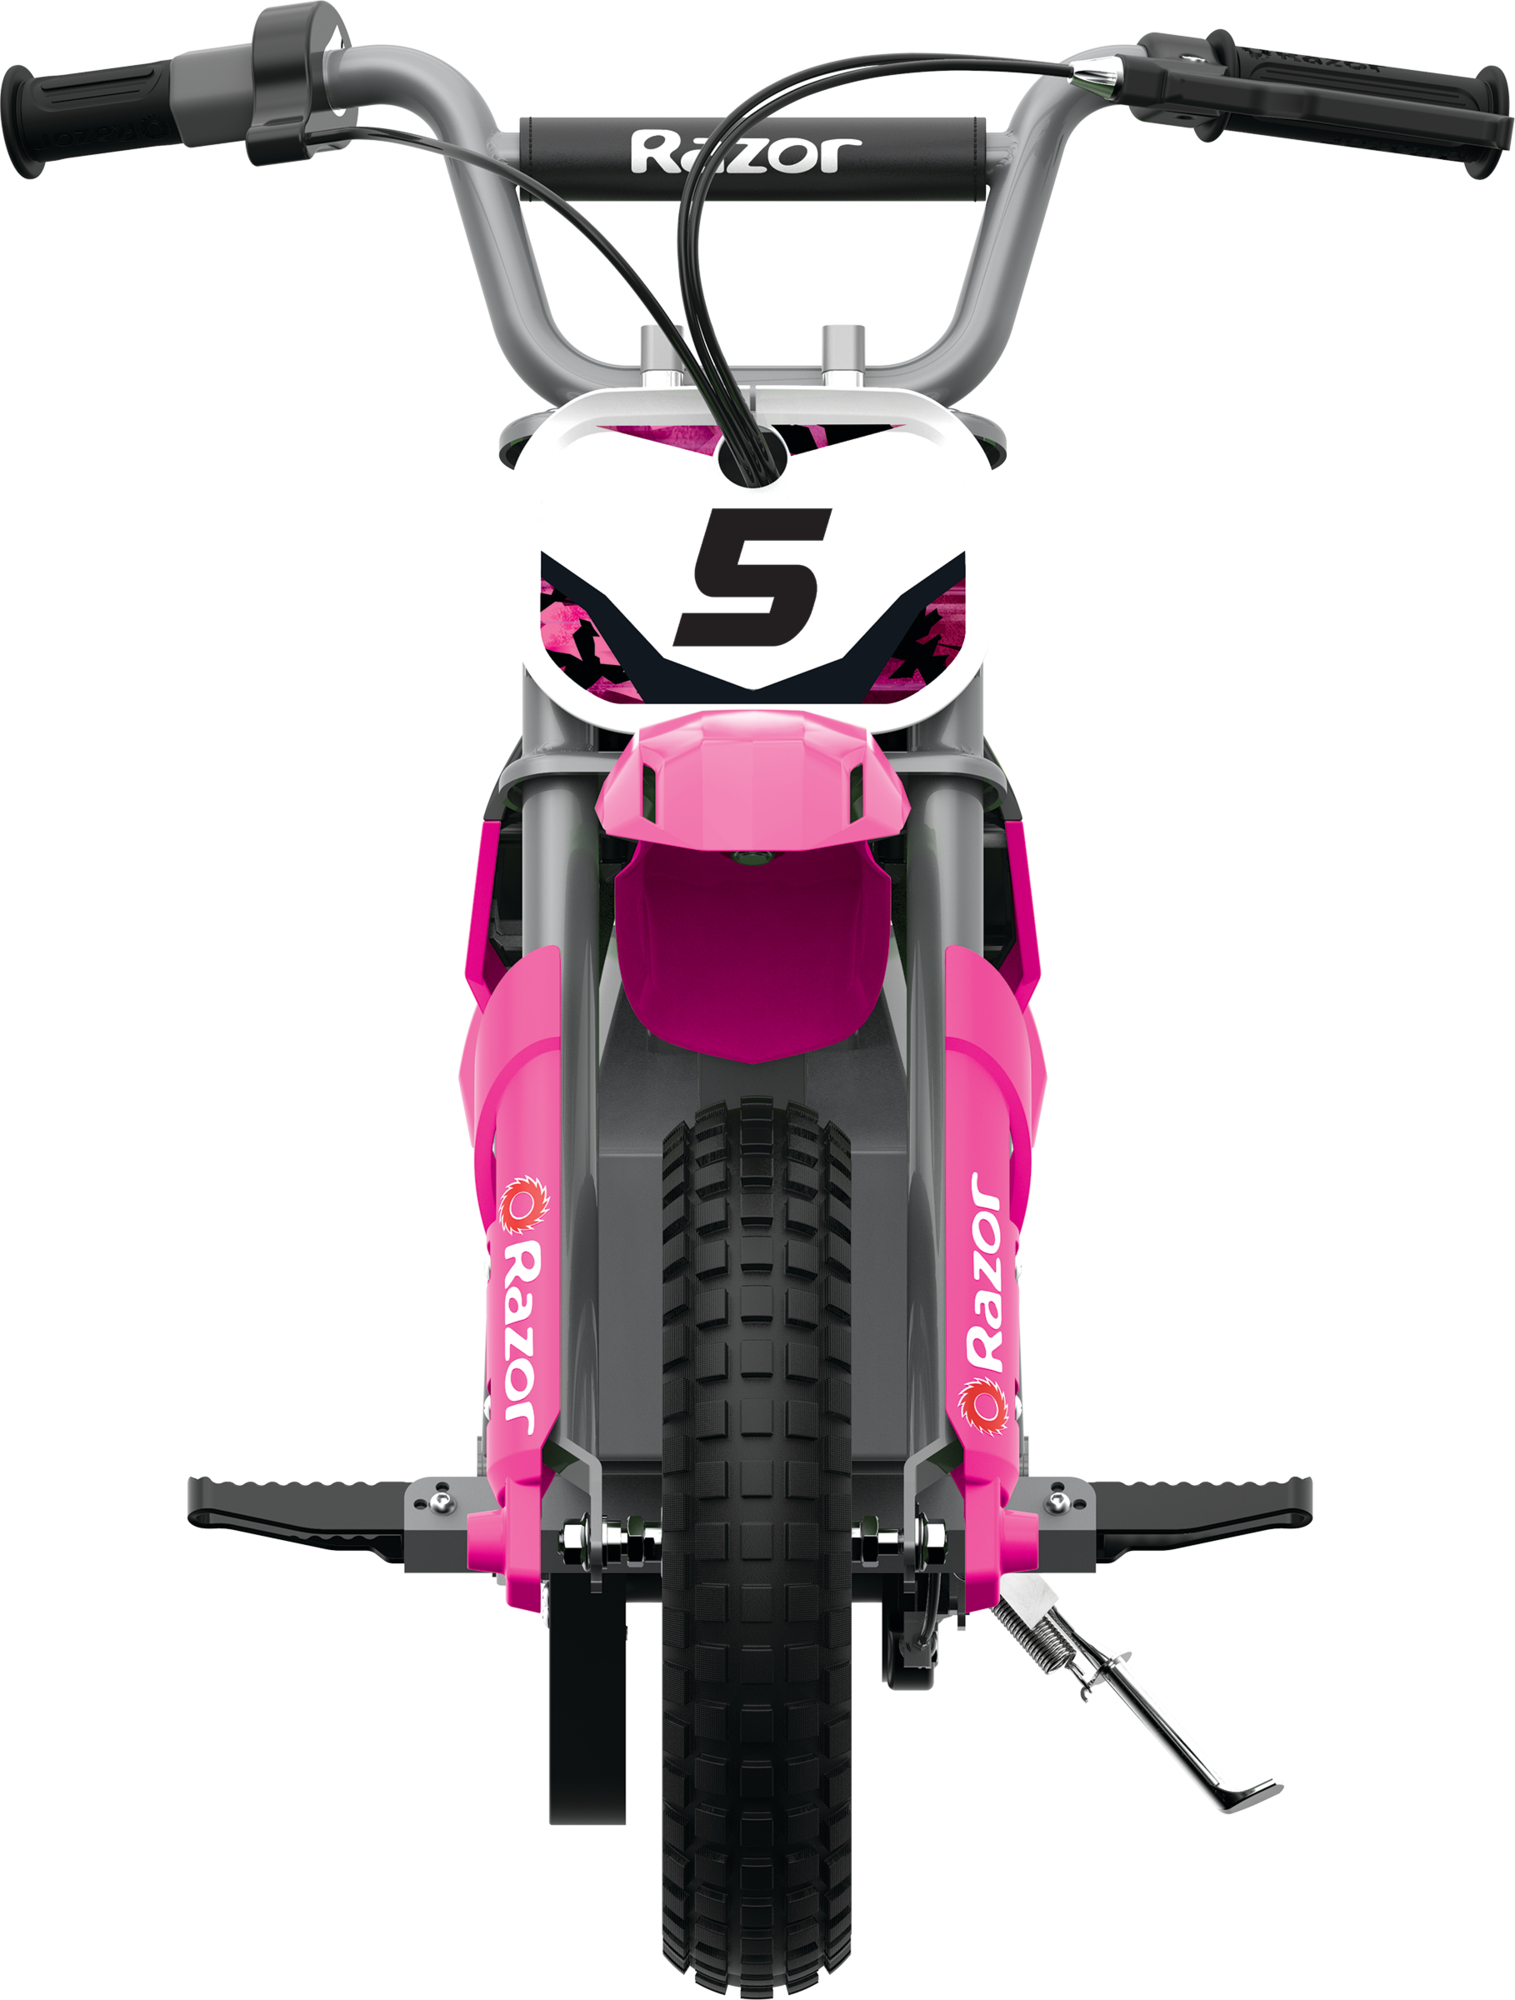 Razor Dirt Rocket MX350 - Pink, up to 14 mph, 24V Electric-Powered Dirt Bike for Kids 13+ - image 8 of 10